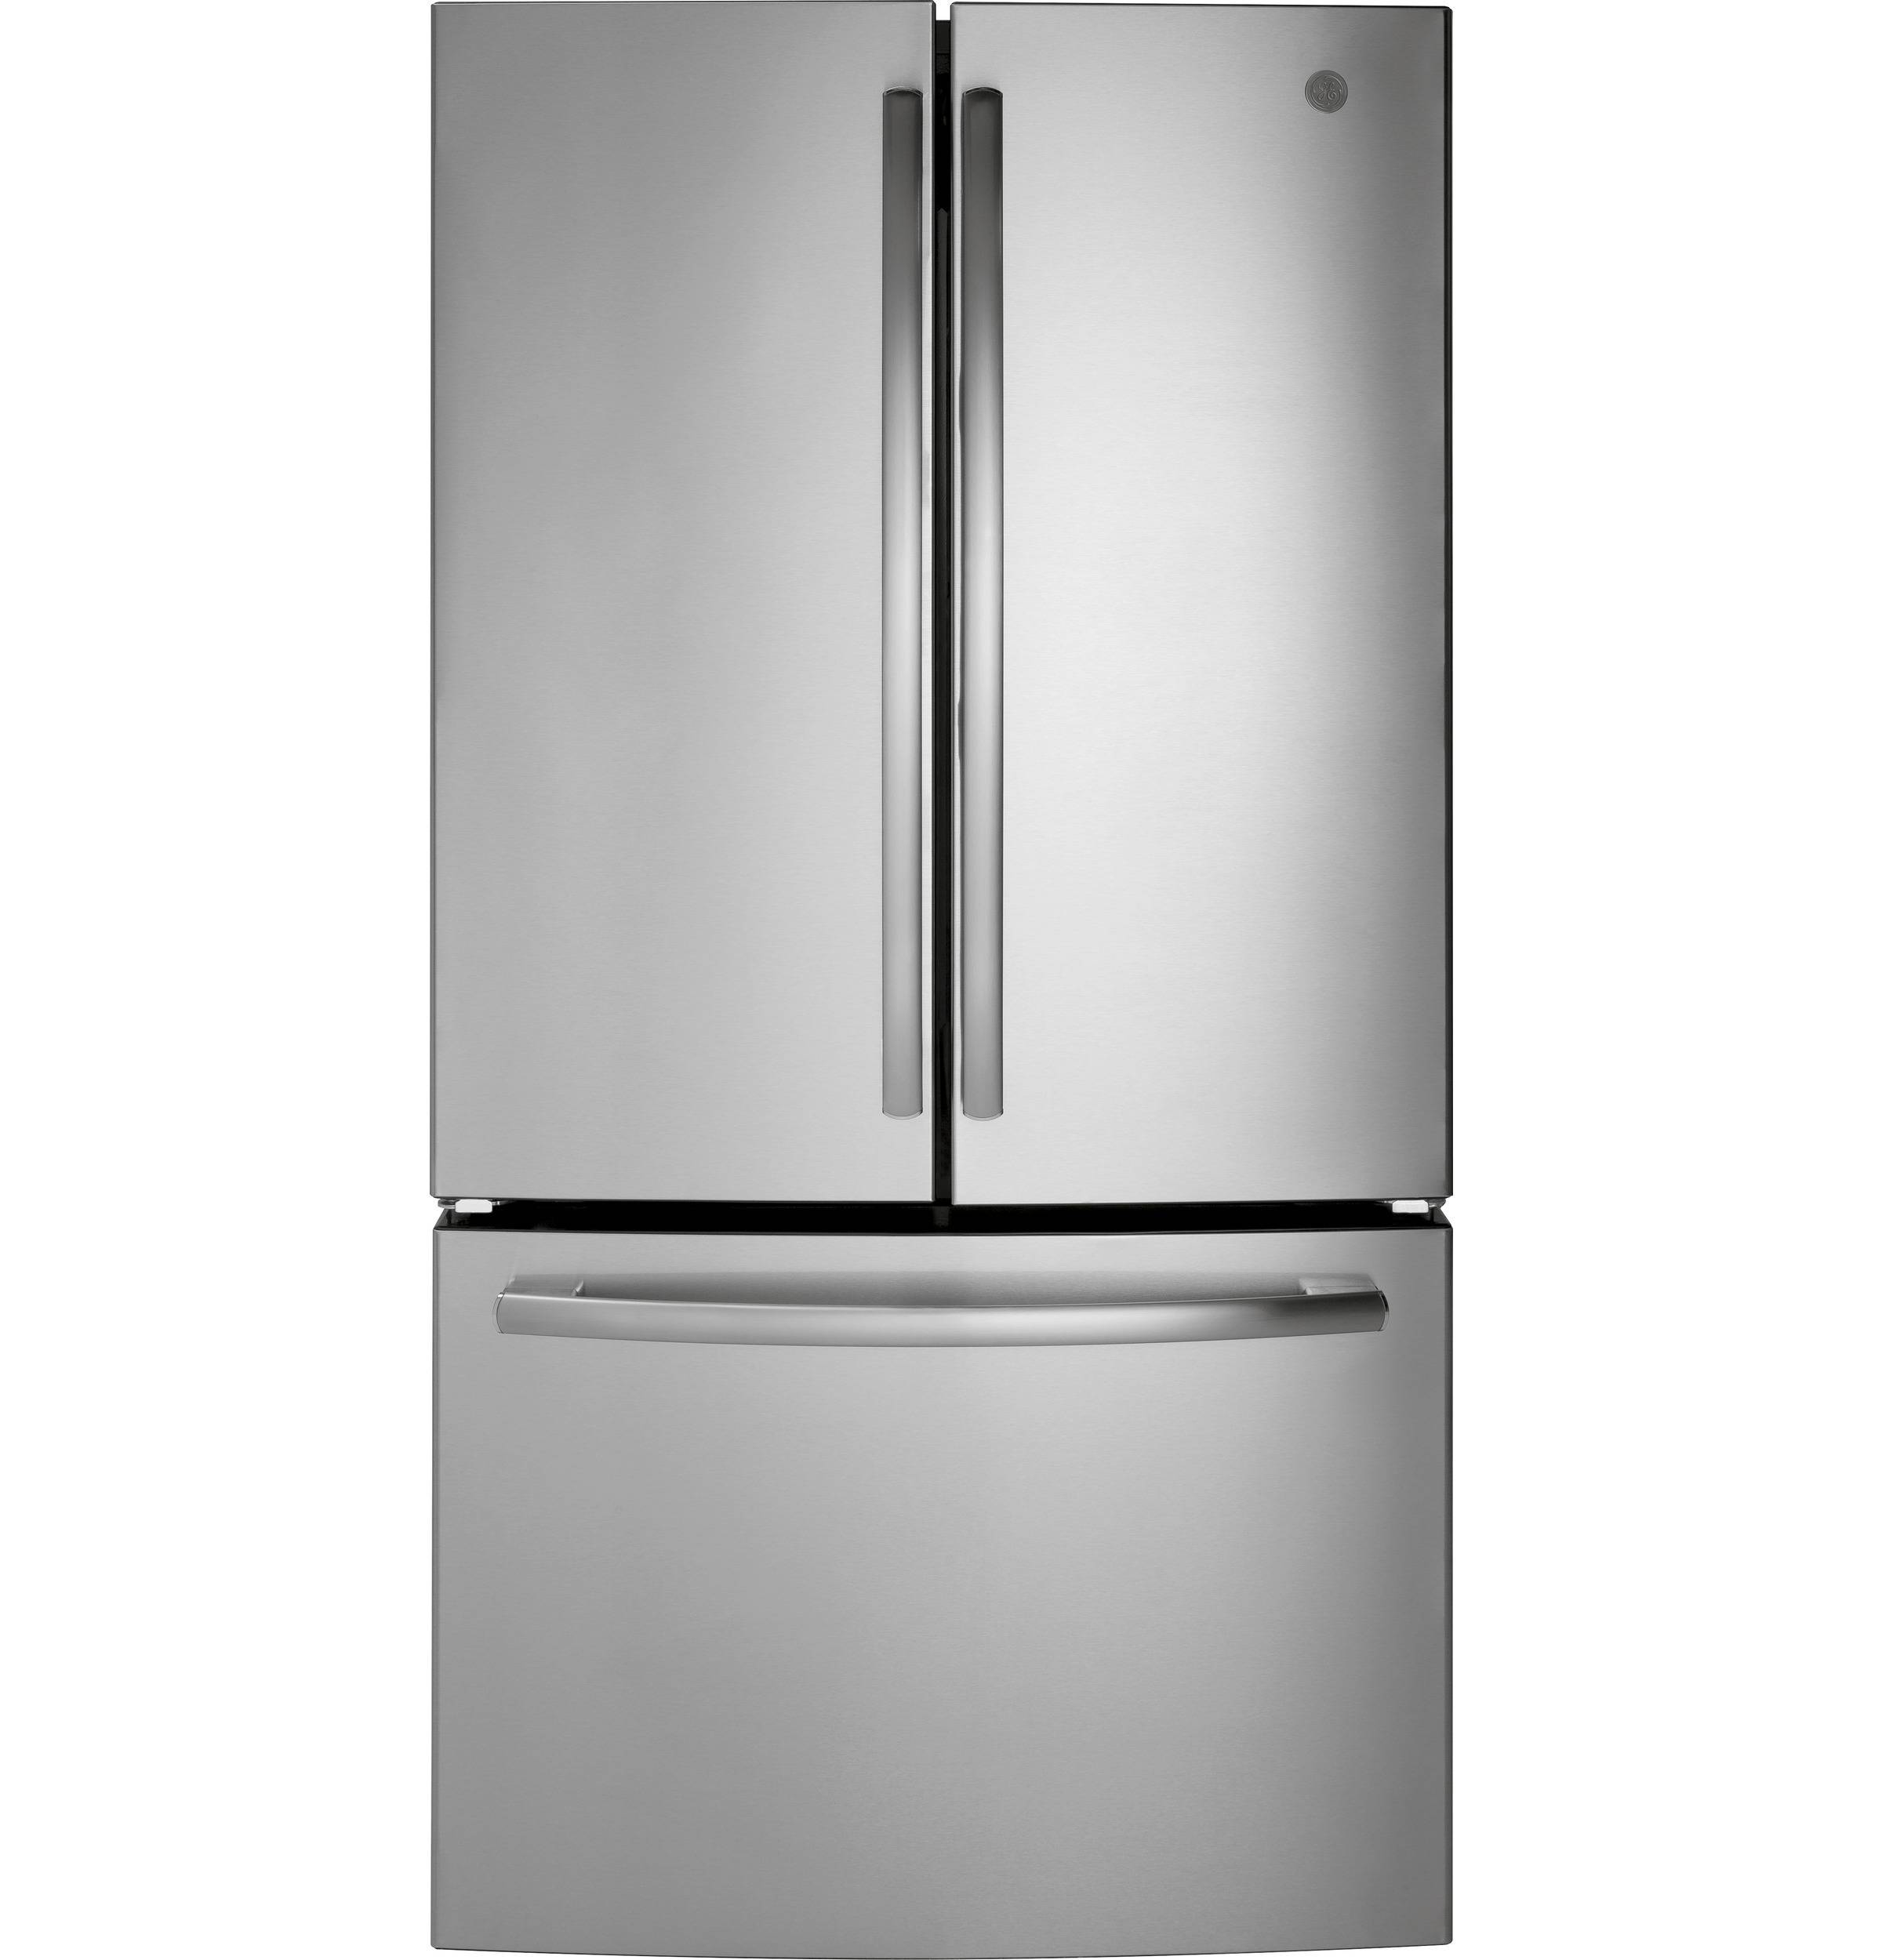 GE 27.0 Cubic-Feet ENERGY STAR-Certified French-Door Refrigerator (Stainless Steel)